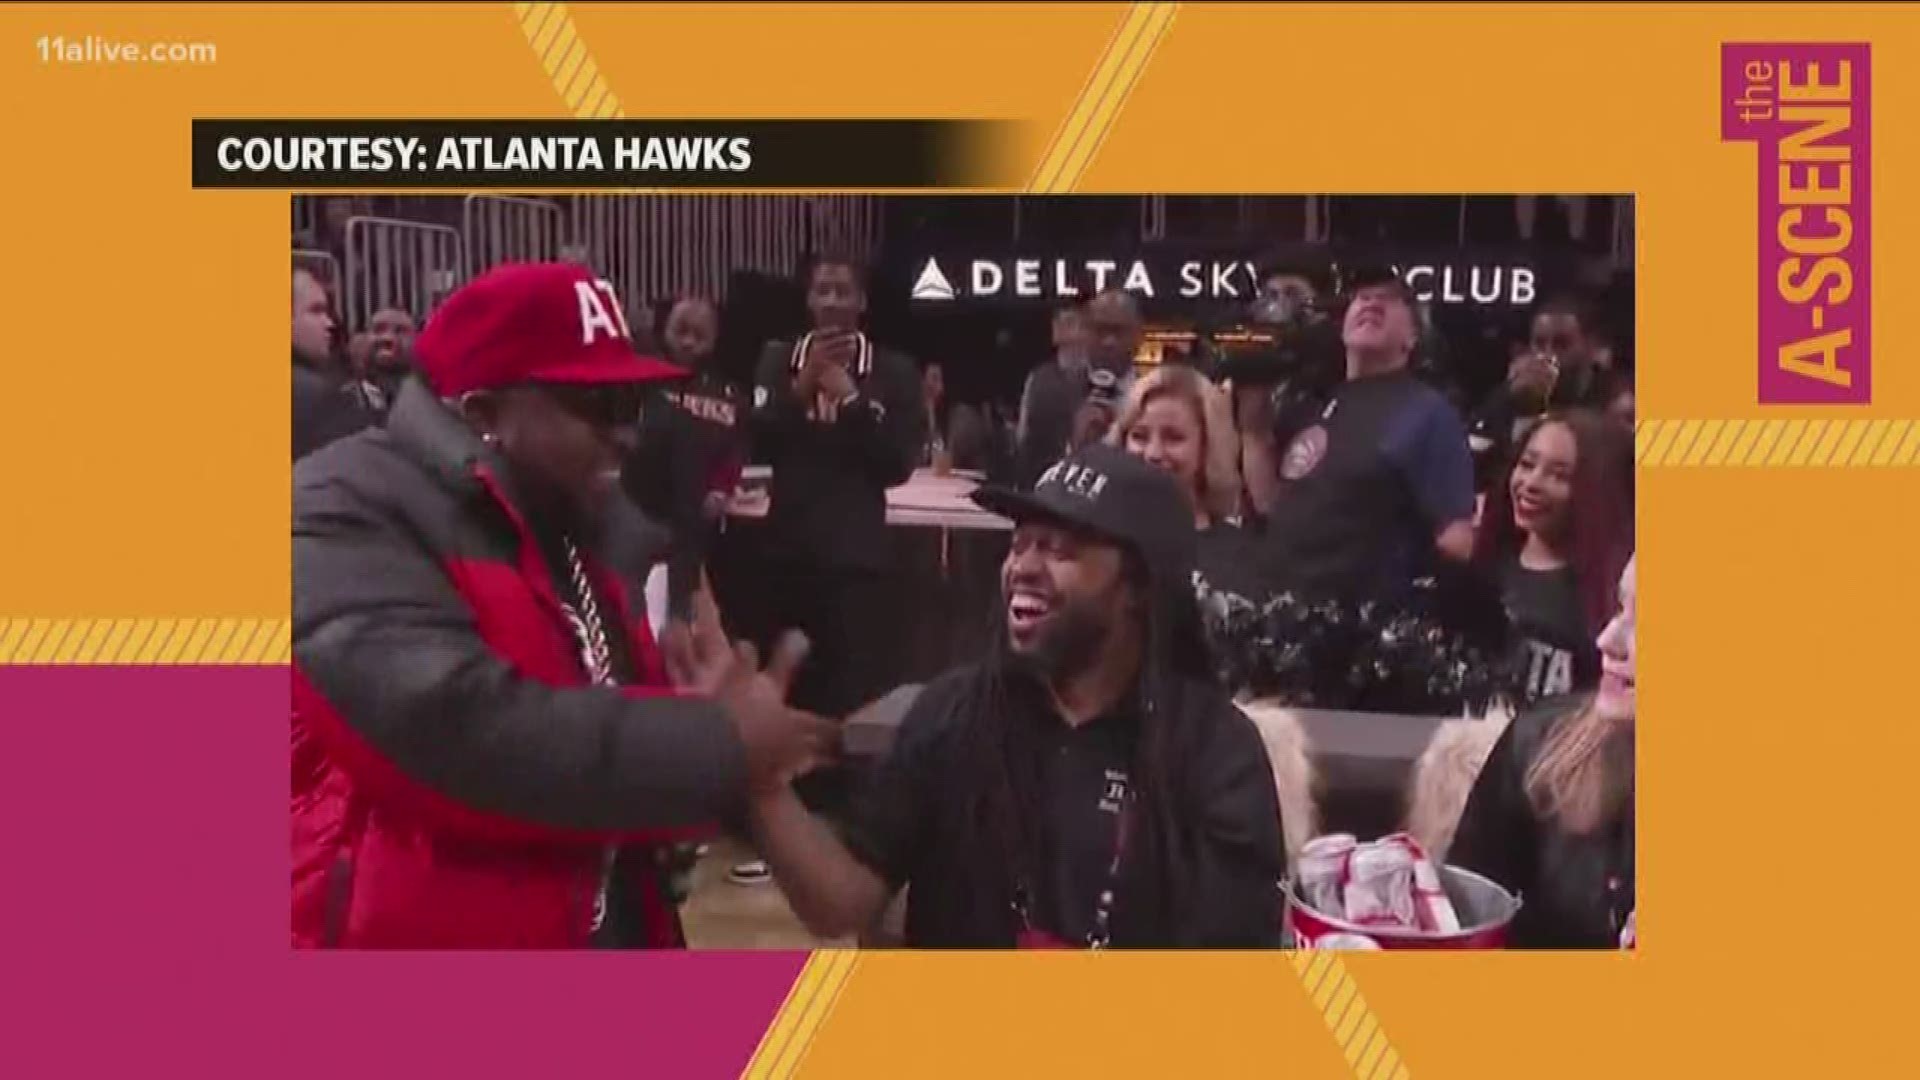 The Atlanta hip hop legend came out and said hello to two fans sitting in Big Boi's seats at the Hawks game.